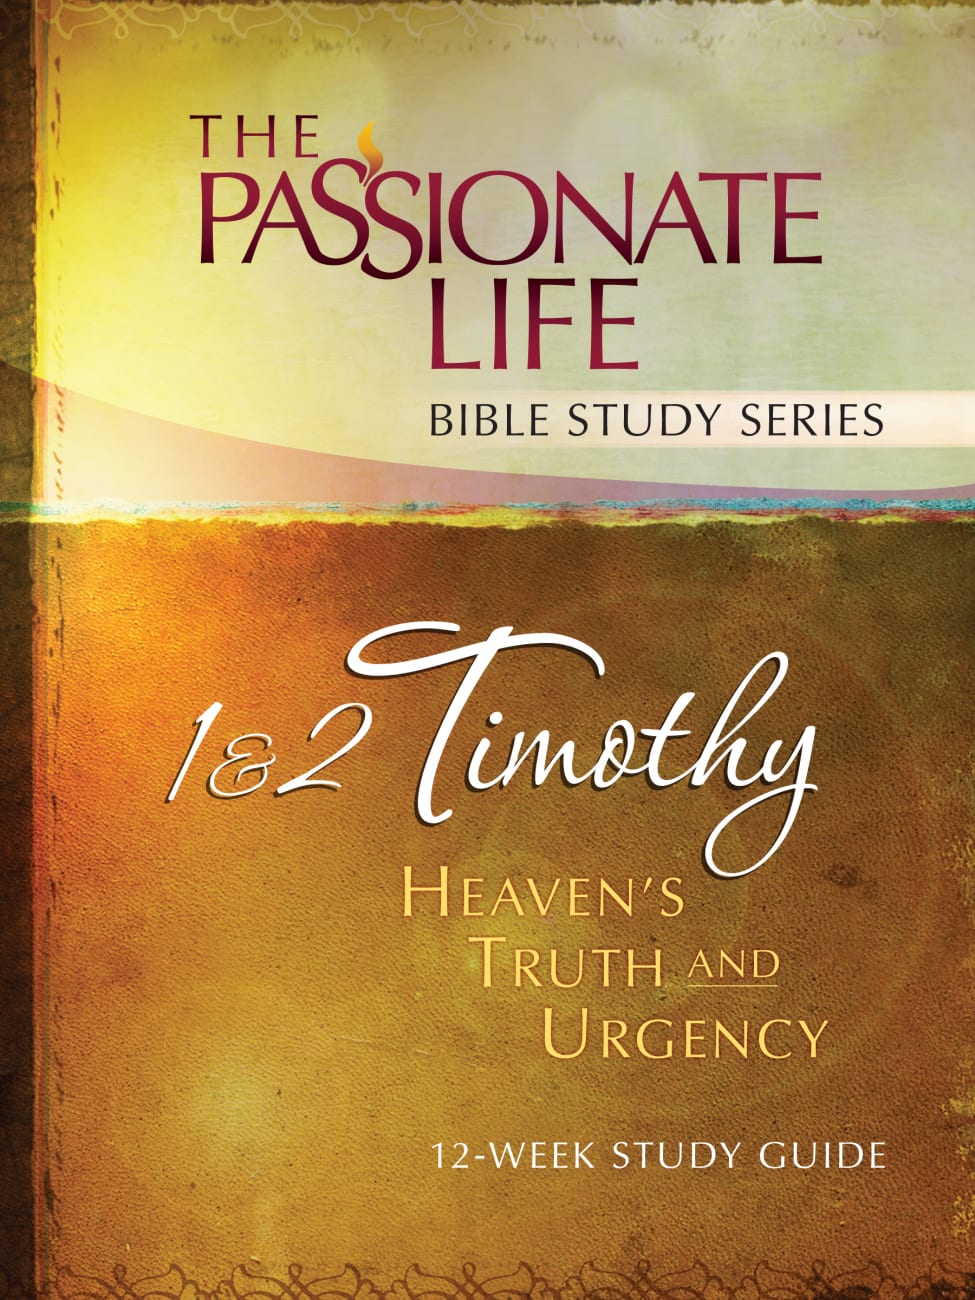 1 & 2 Timothy - Heaven's Truth and Urgency (The Passionate Life Bible Study Series) Paperback